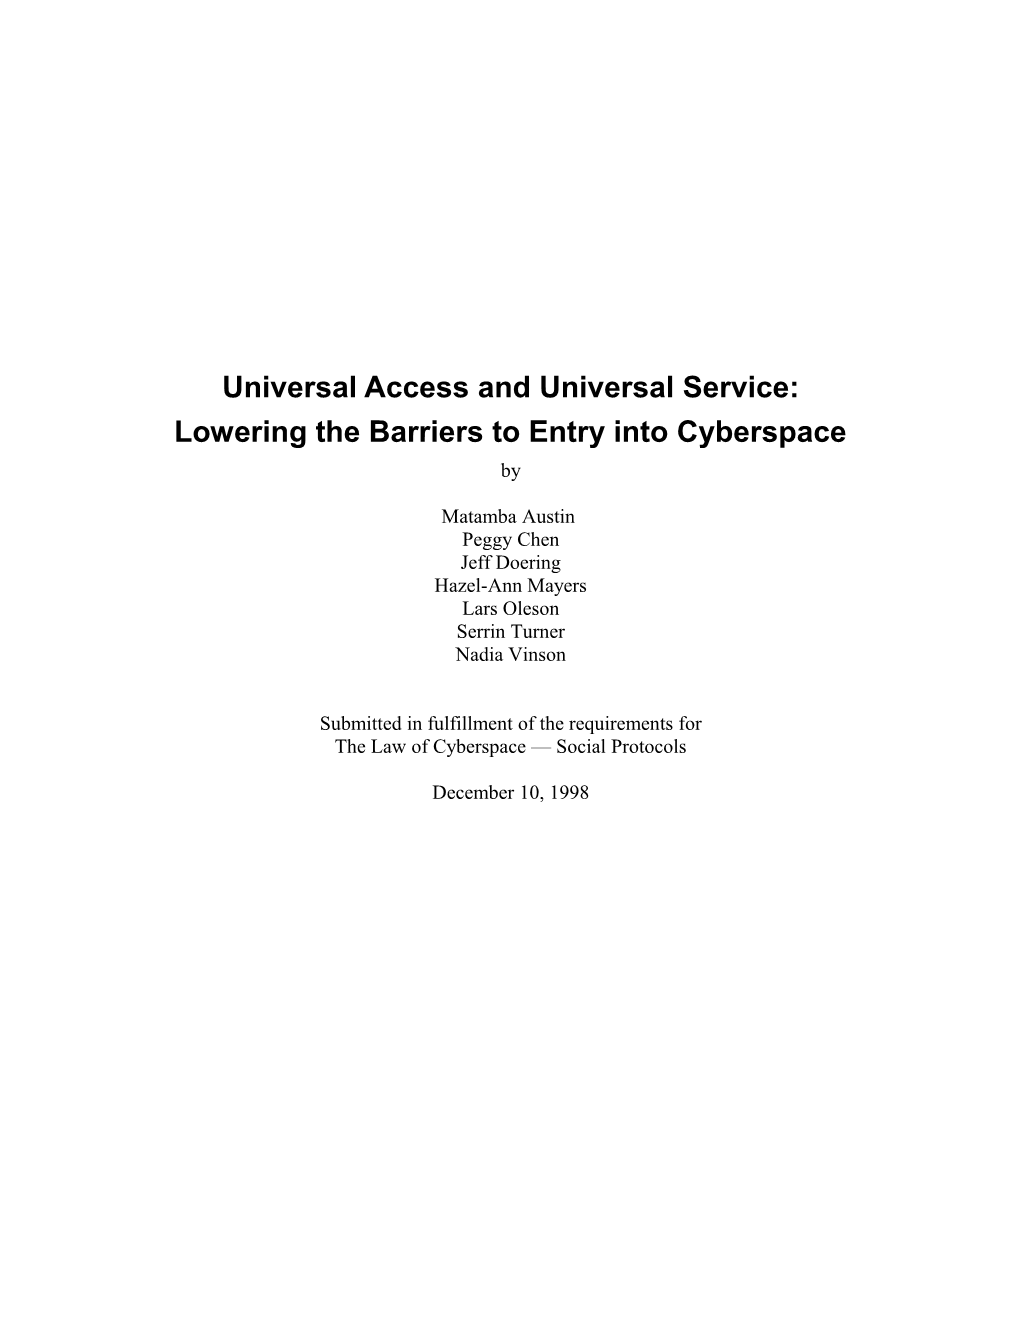 Universal Access and Universal Service